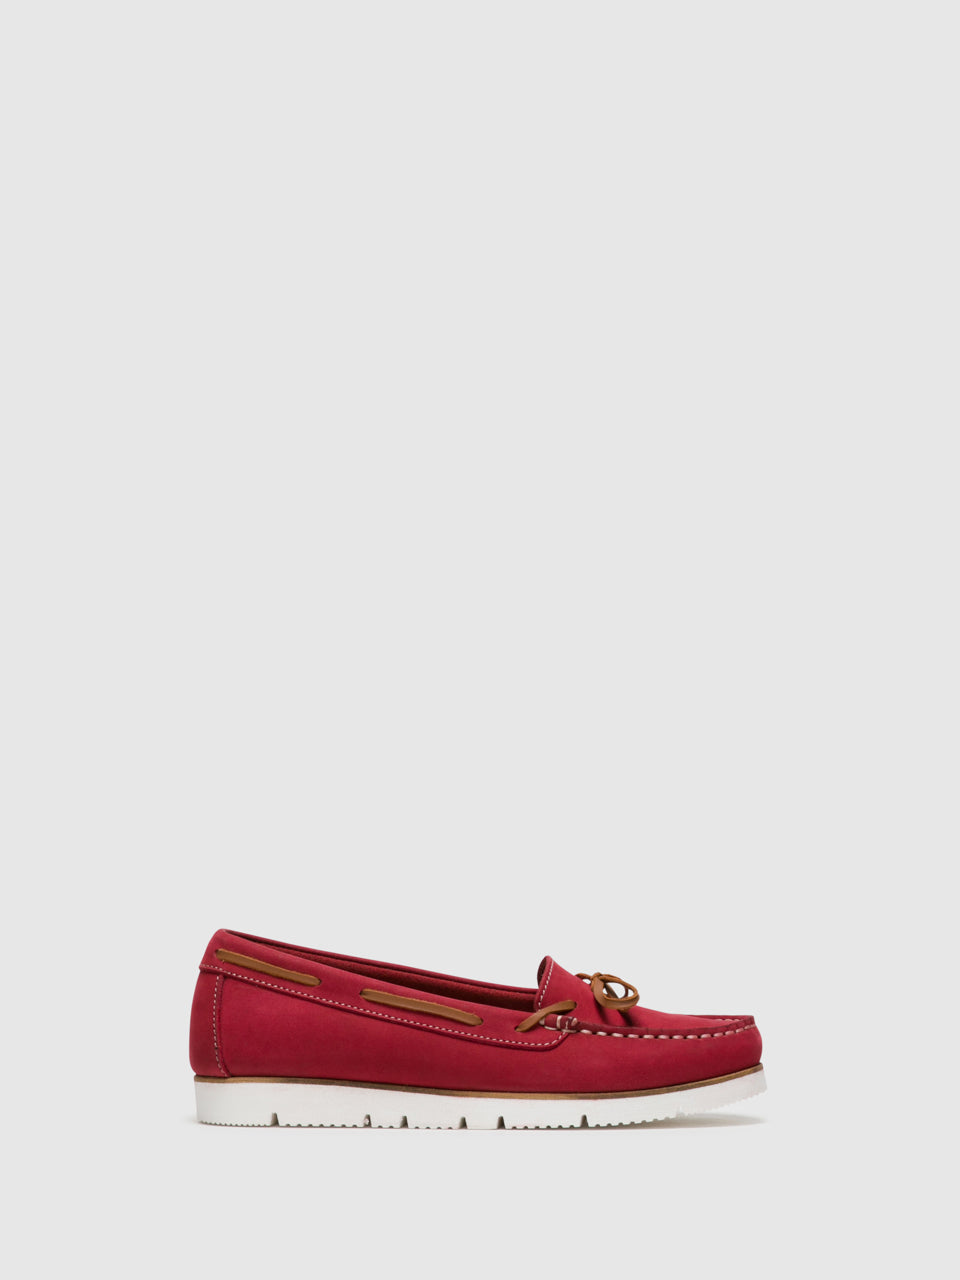 Foreva Red Nautical Shoes